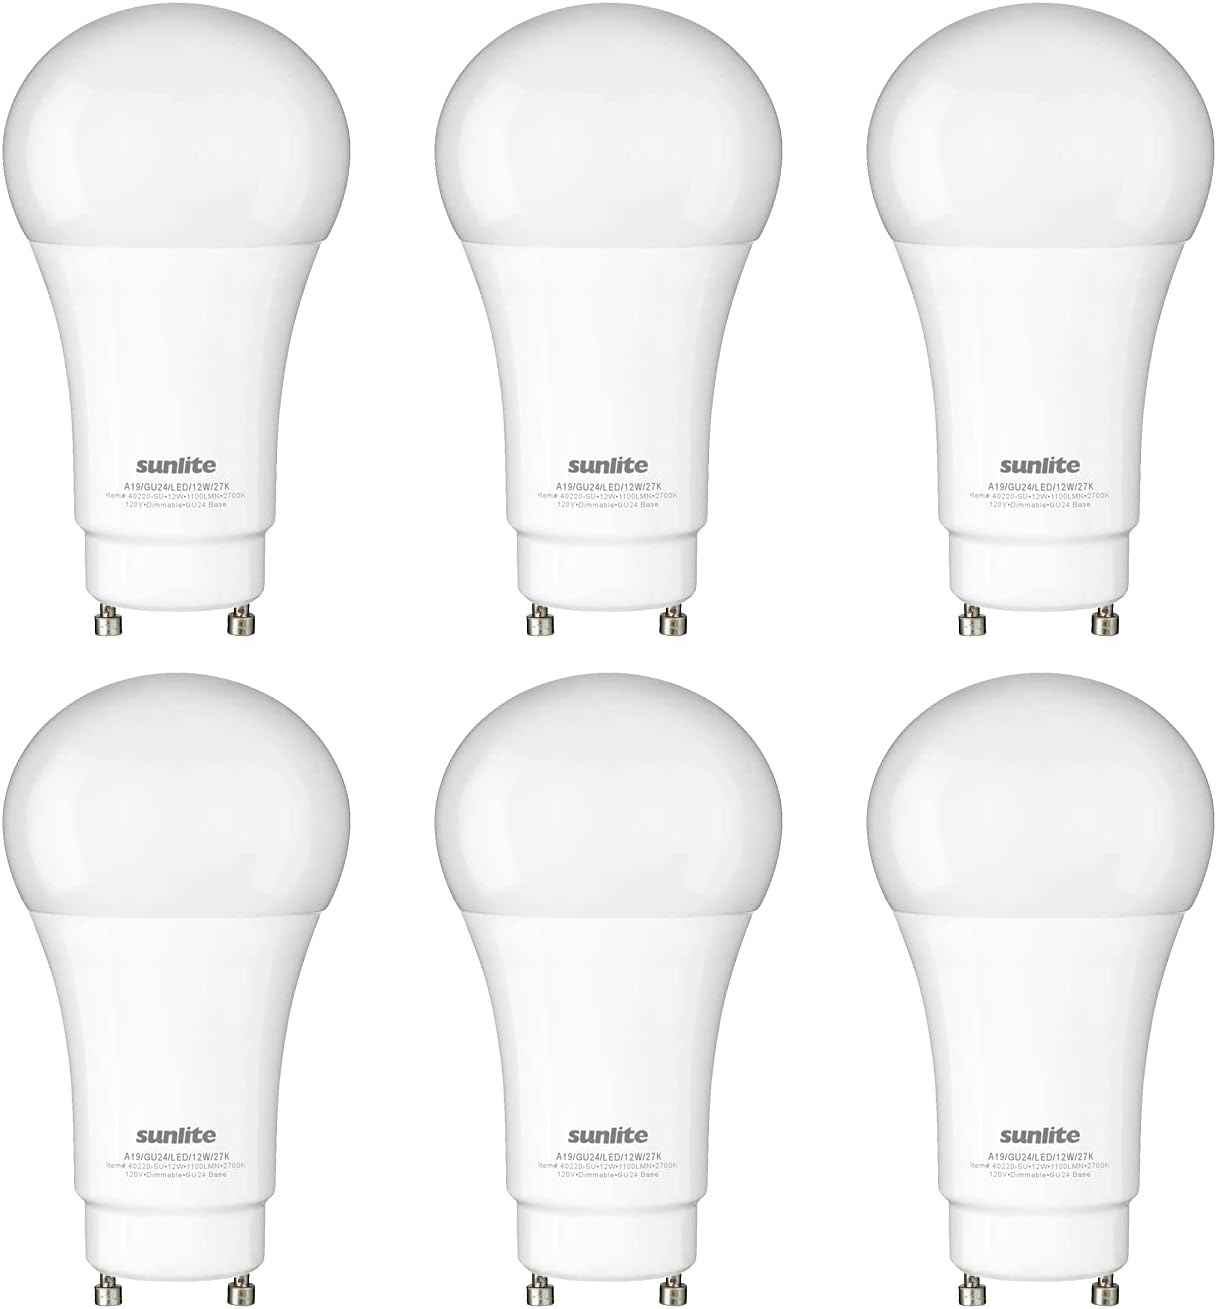 Sunlite 88254 LED A19 Light Bulb 12 Watts (75W Equivalent) 1100 Lumens, GU24 Twist and Lock Base, Dimmable, UL Listed, Energy Star, 2700K Warm White, 6 Count